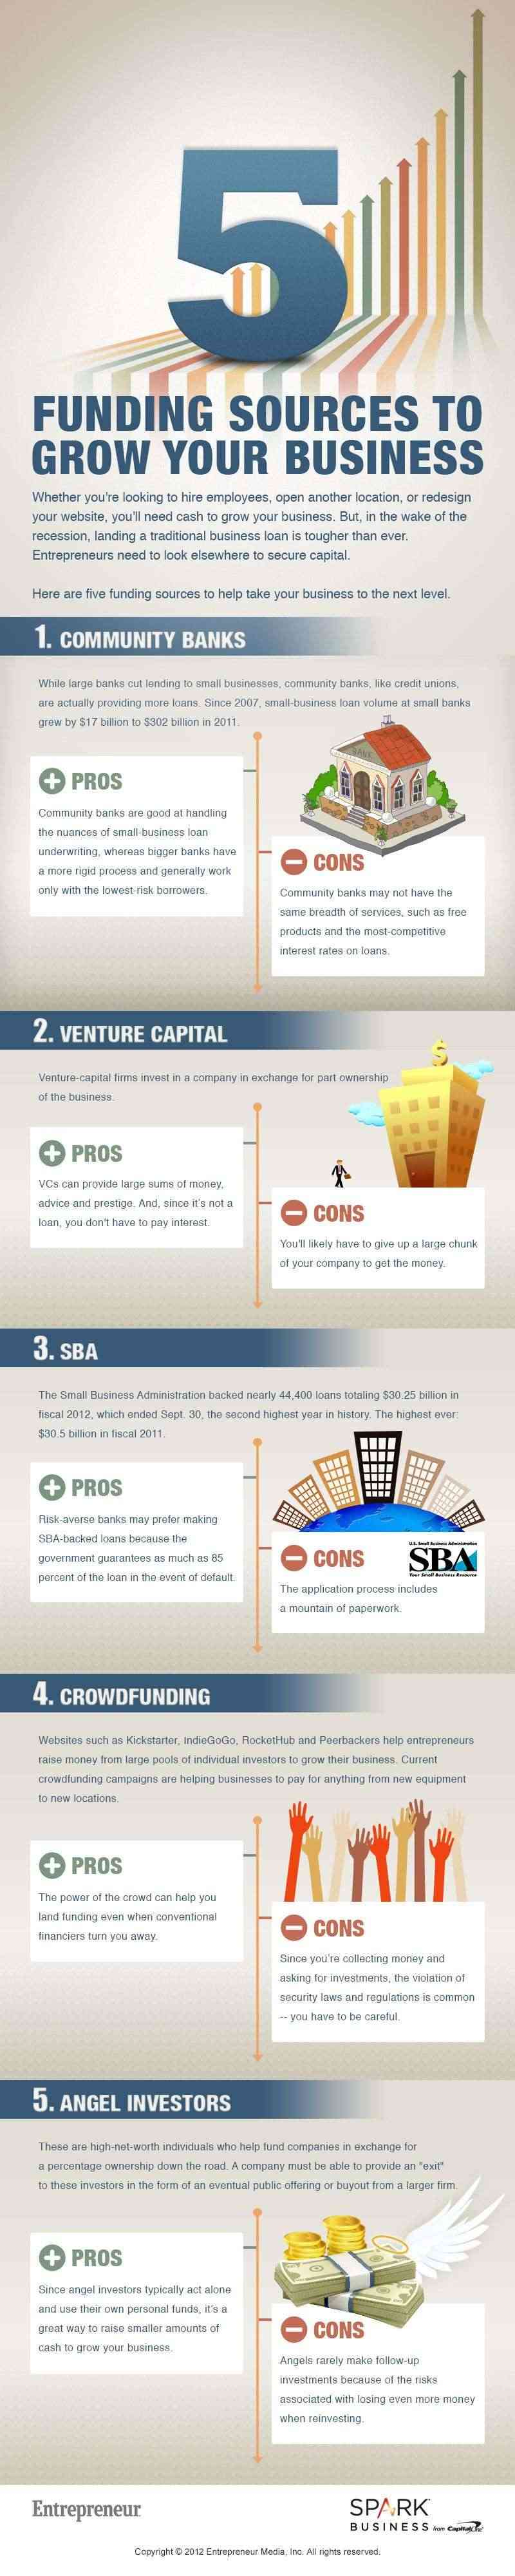 5 Funding Sources to Grow Your Business (Infographic)  5-fund10